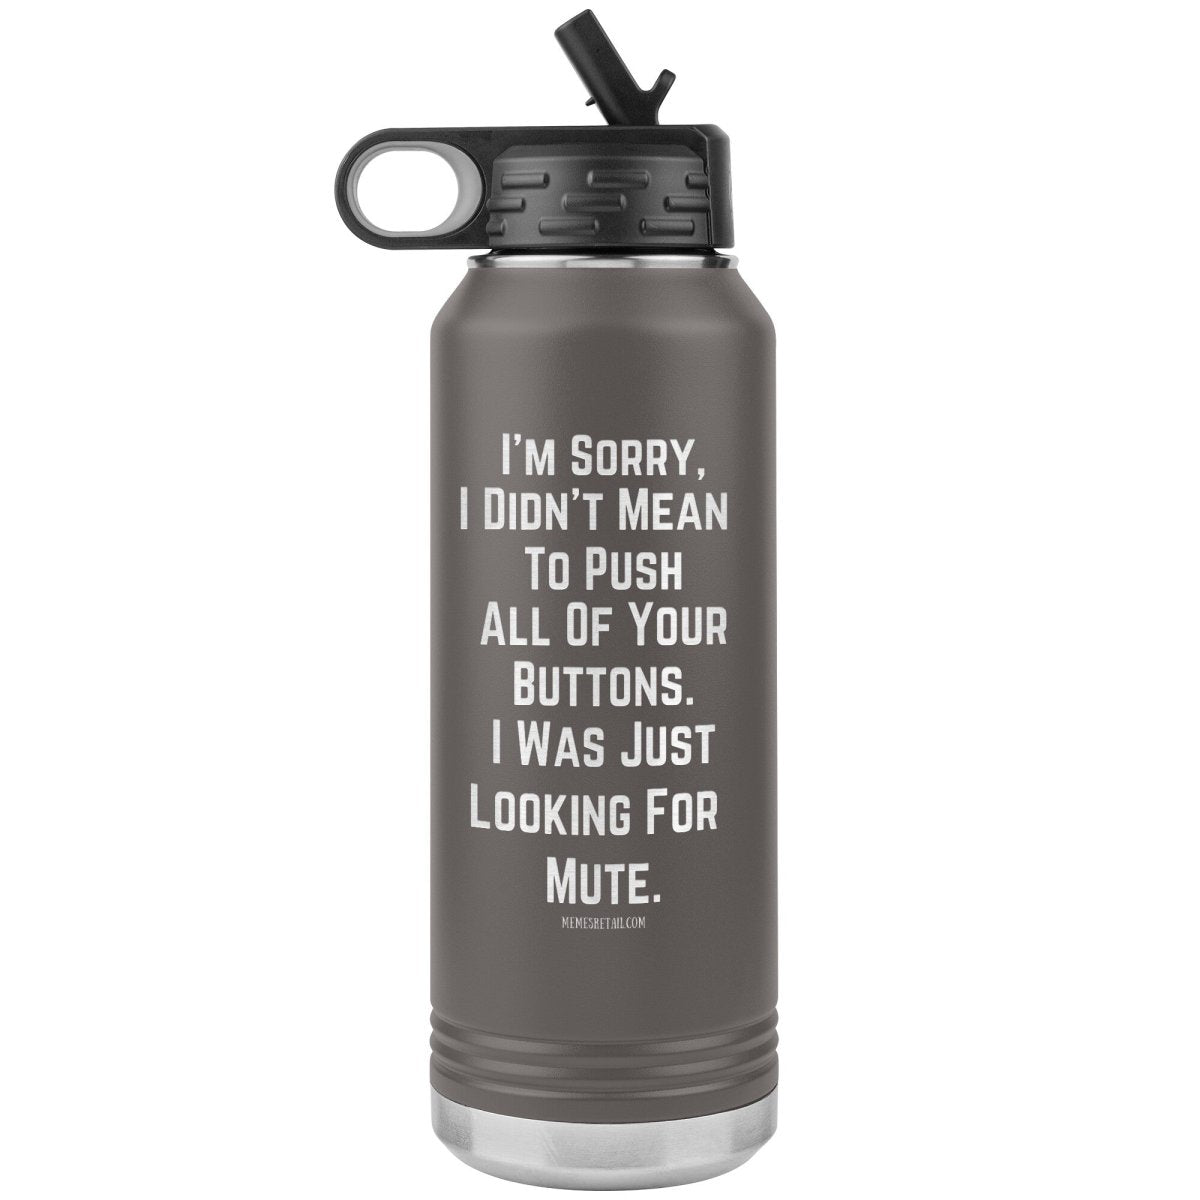 I’m sorry, I didn’t mean to push all your buttons, I was just looking for mute 32 oz water tumbler, Pewter - MemesRetail.com